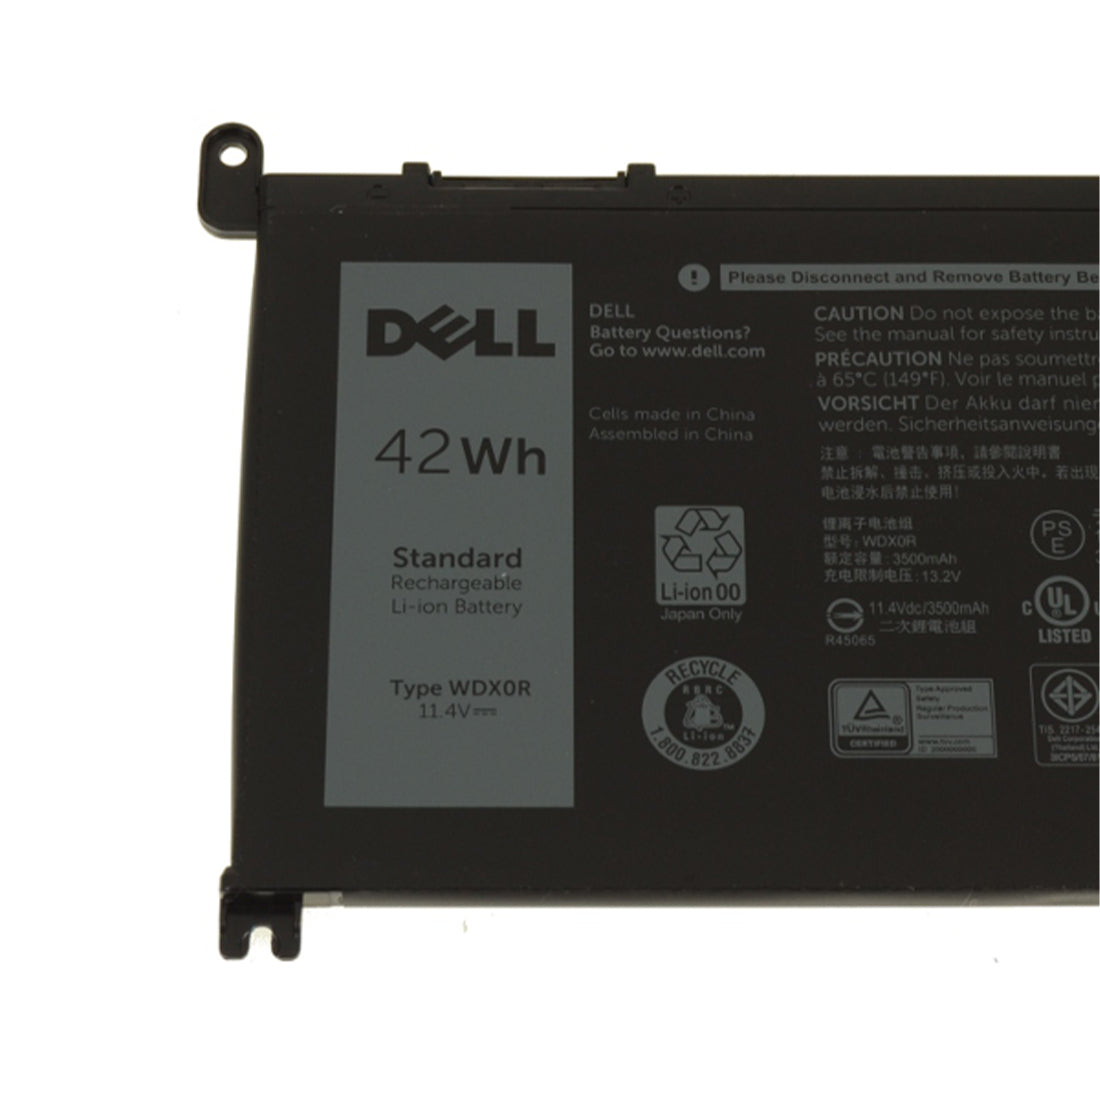 Dell Original 3500mAh 11.4V 42WHR 3-Cell Replacement Laptop Battery for Inspiron 15 5570